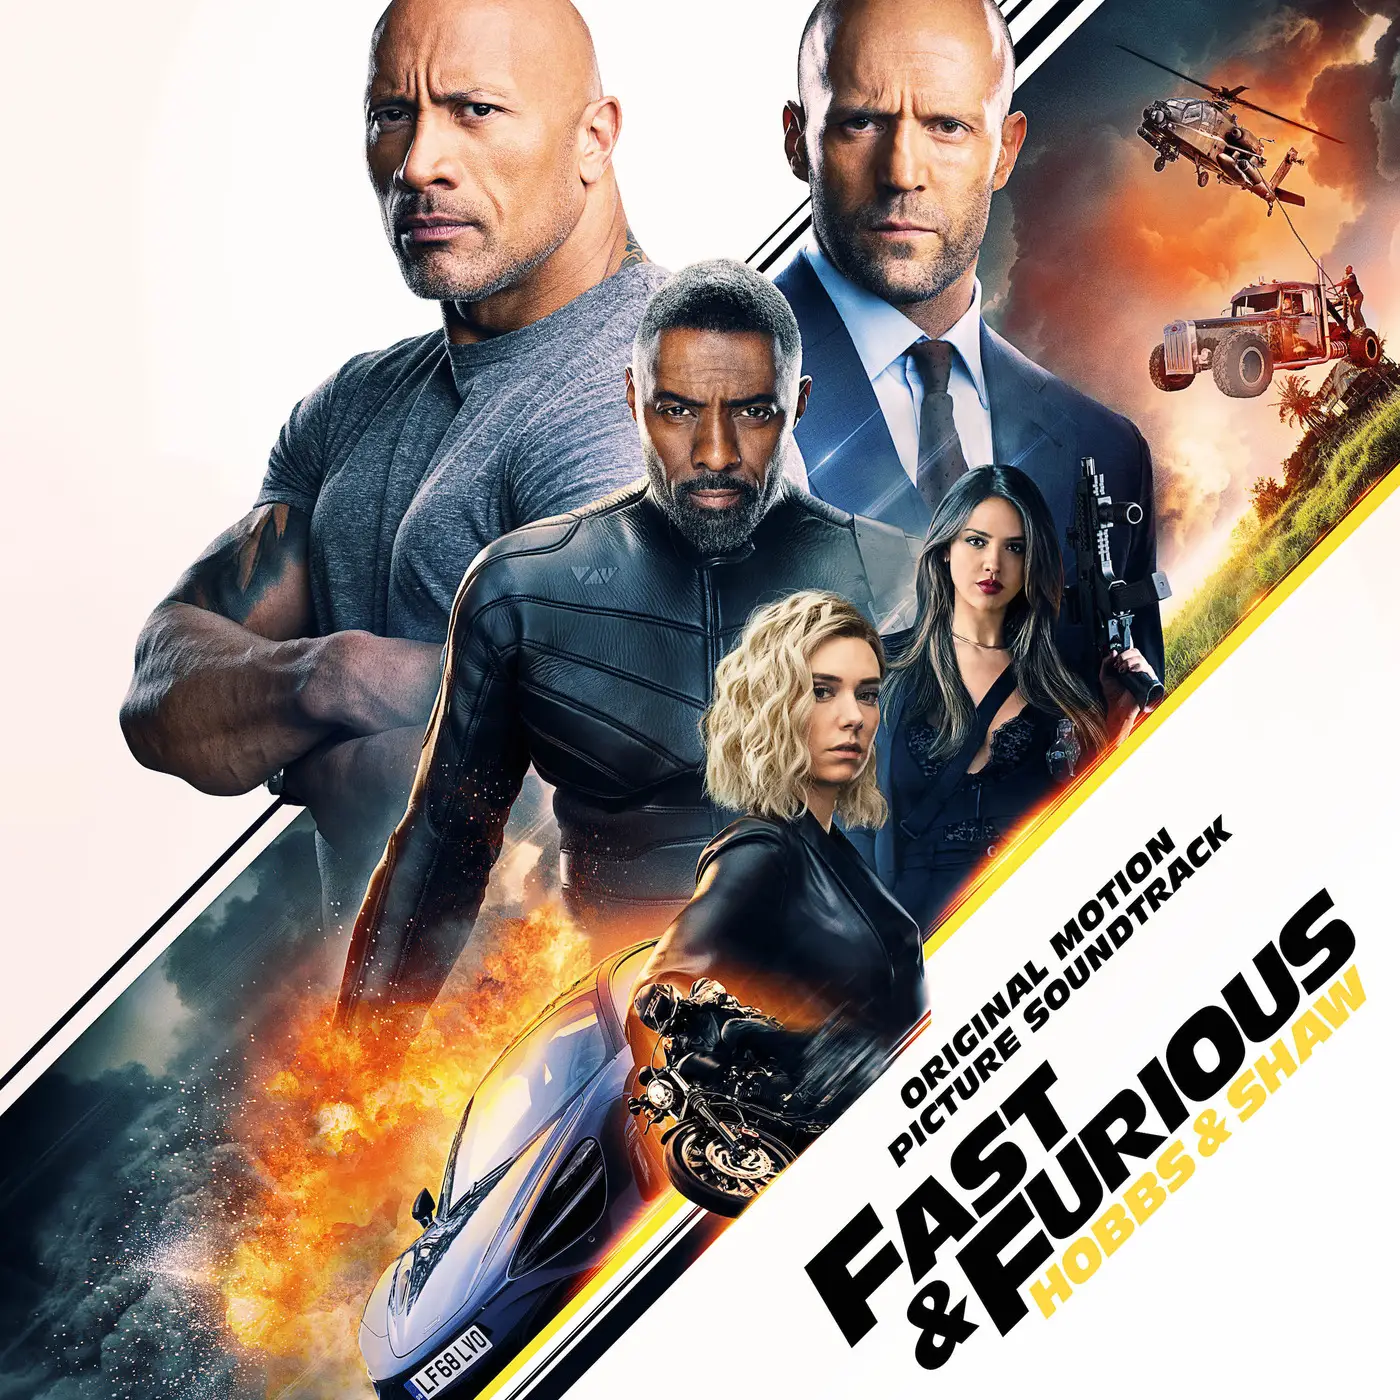 Va Fast And Furious Presents Hobbs And Shaw Original Motion Picture Soundtrack 2019 Avaxhome